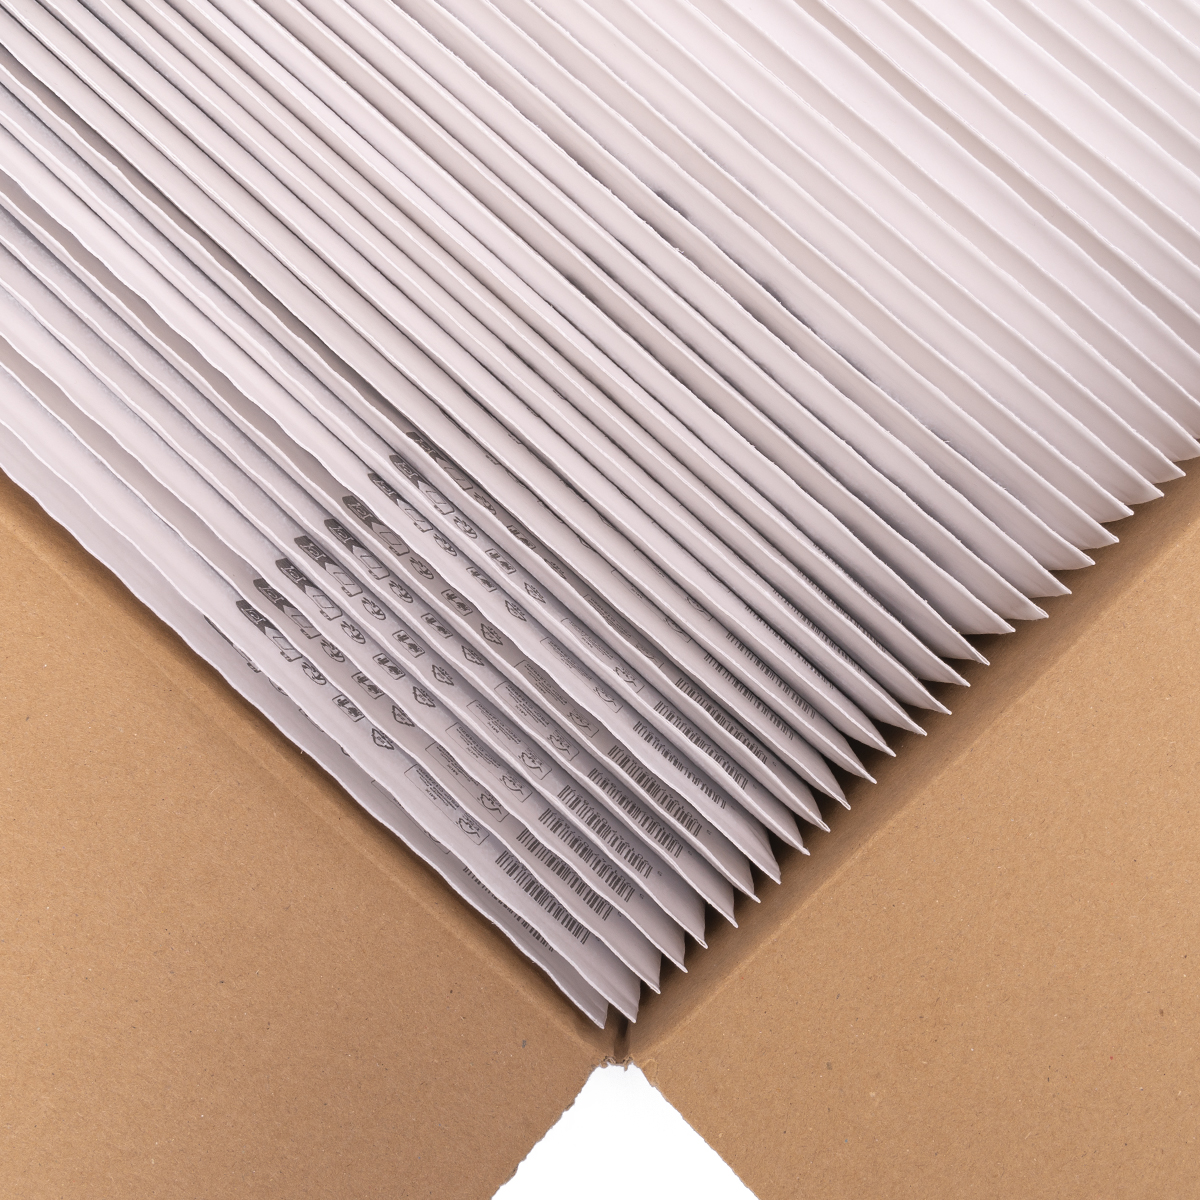 100 Paper Padded Mailing Envelopes 170 x 225 mm White A5 Mailing Envelopes with Paper Pads